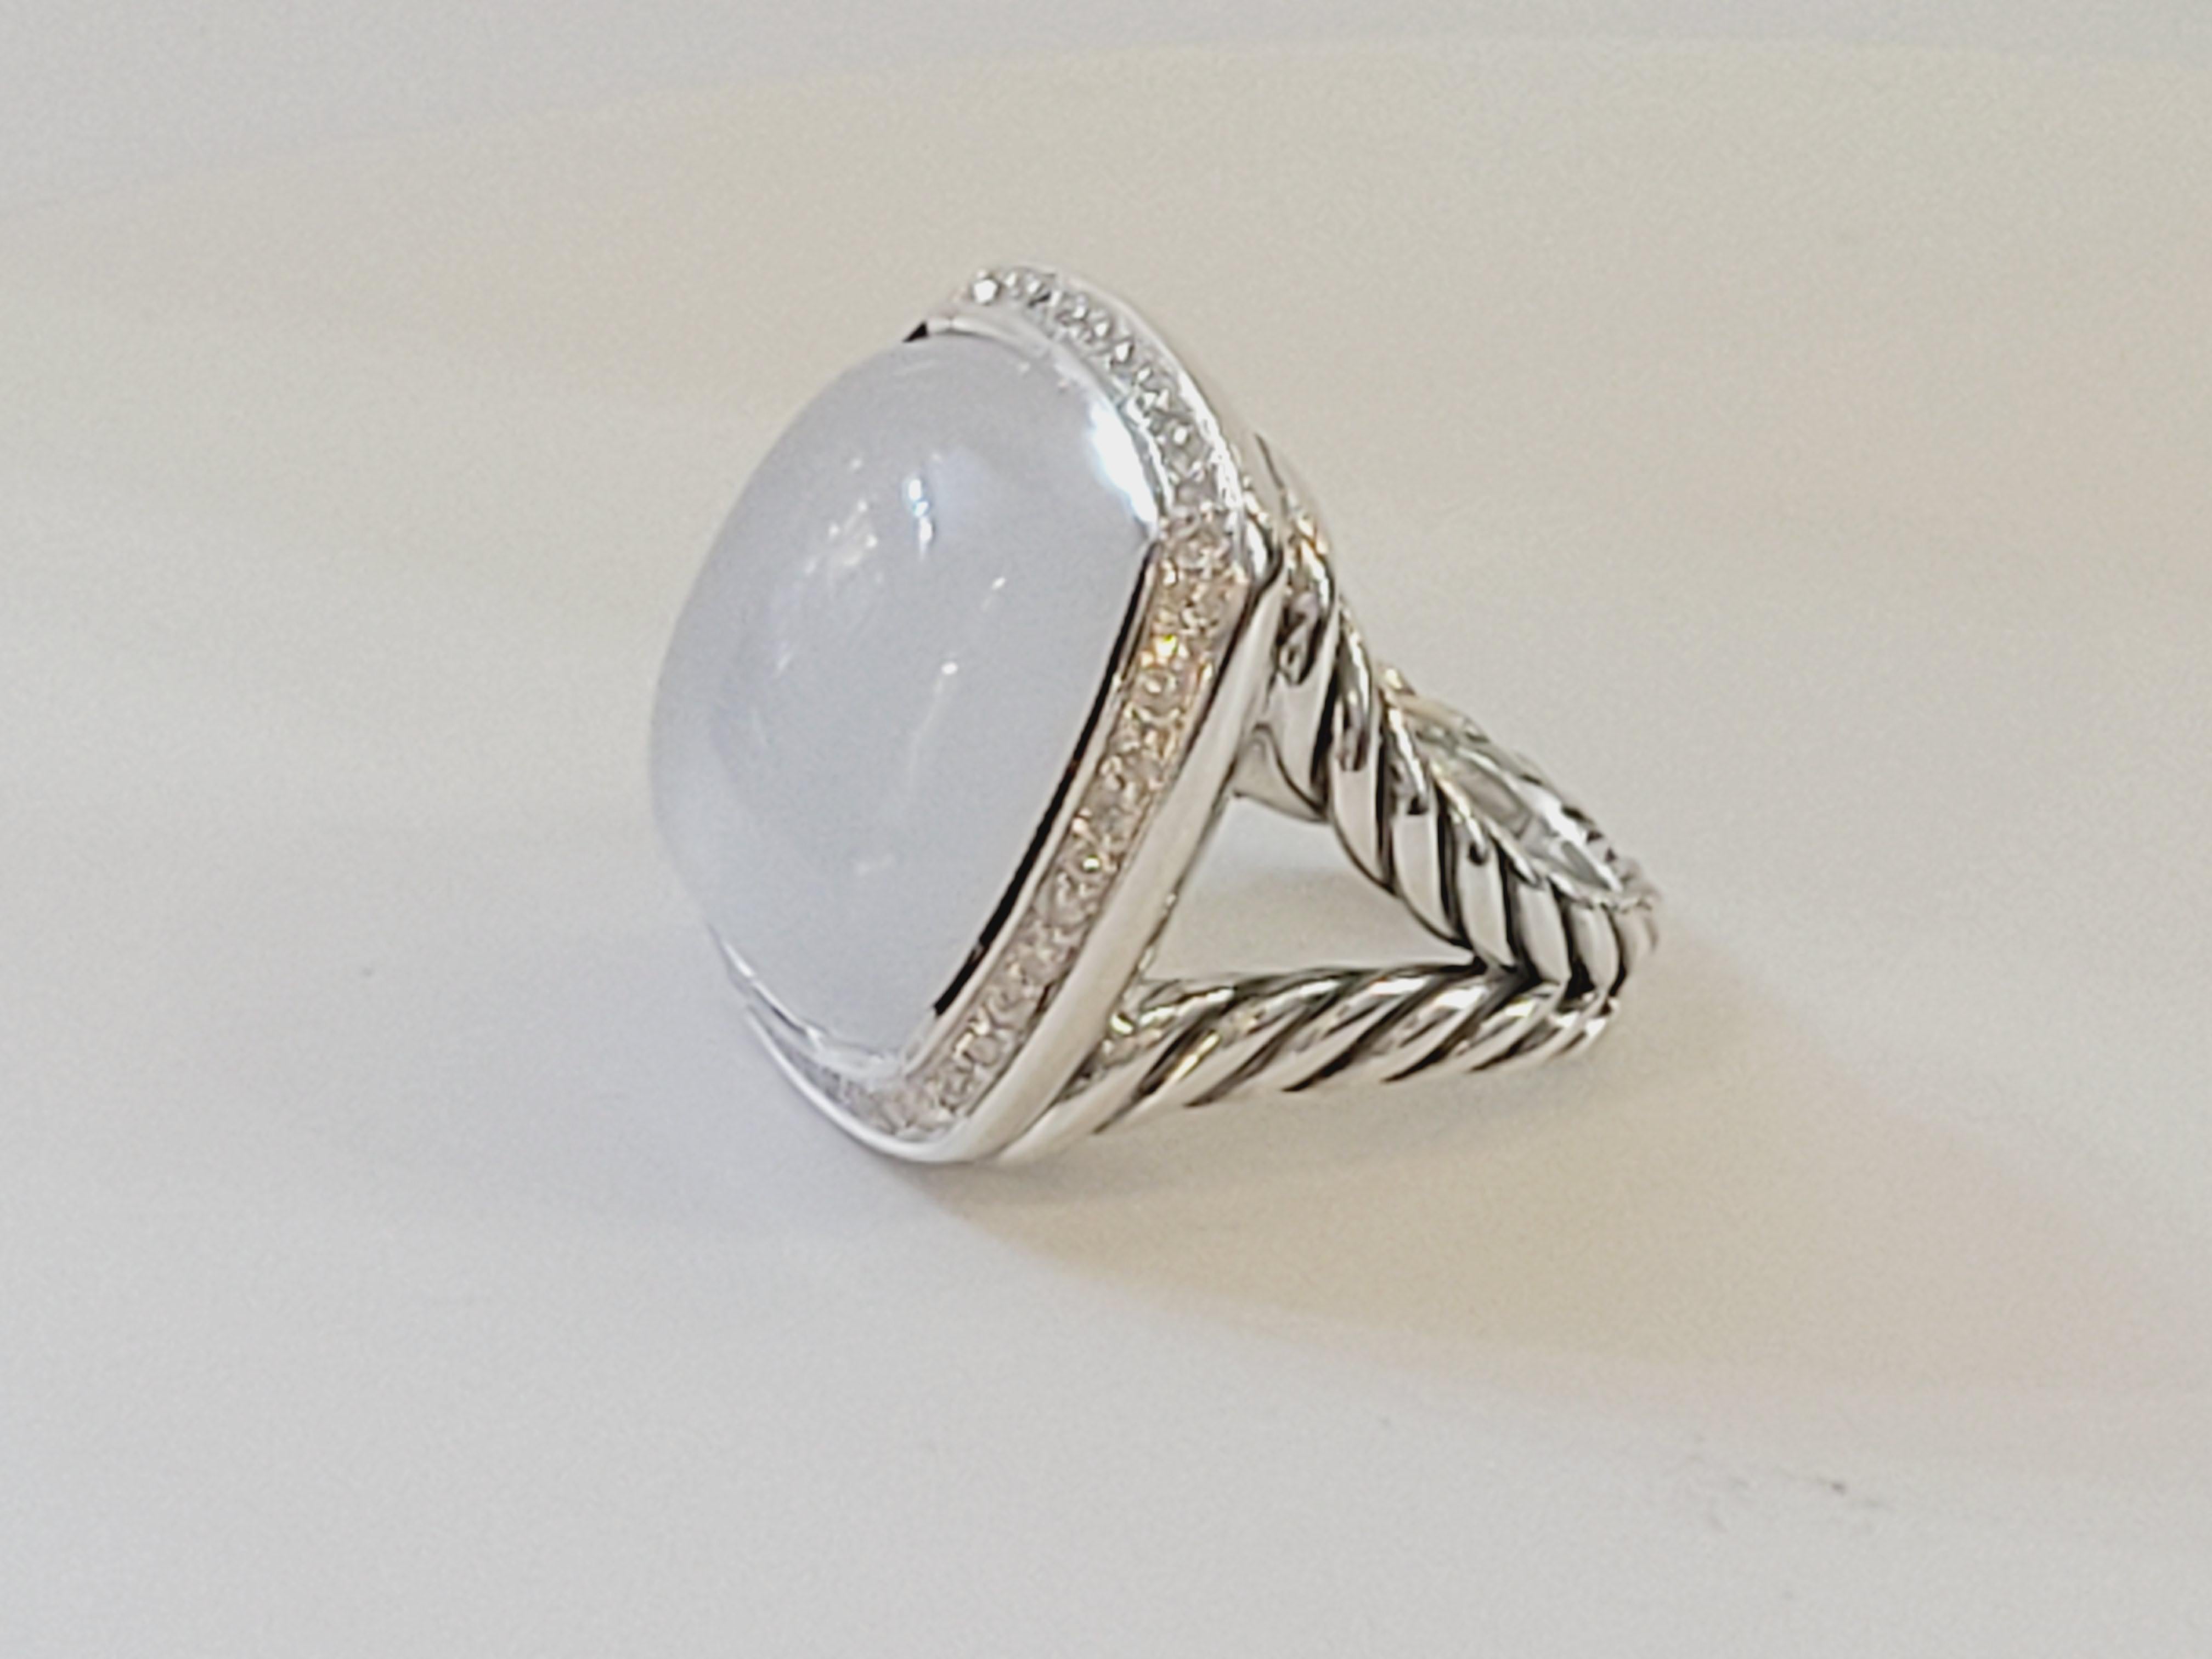 Brand David yurman
Mint condition
type ring
Ring size 7
Ring albion 19.7mm x 19.7mm
Material sterling silver
Metal purity 925
Comes with David Yurman pouch
